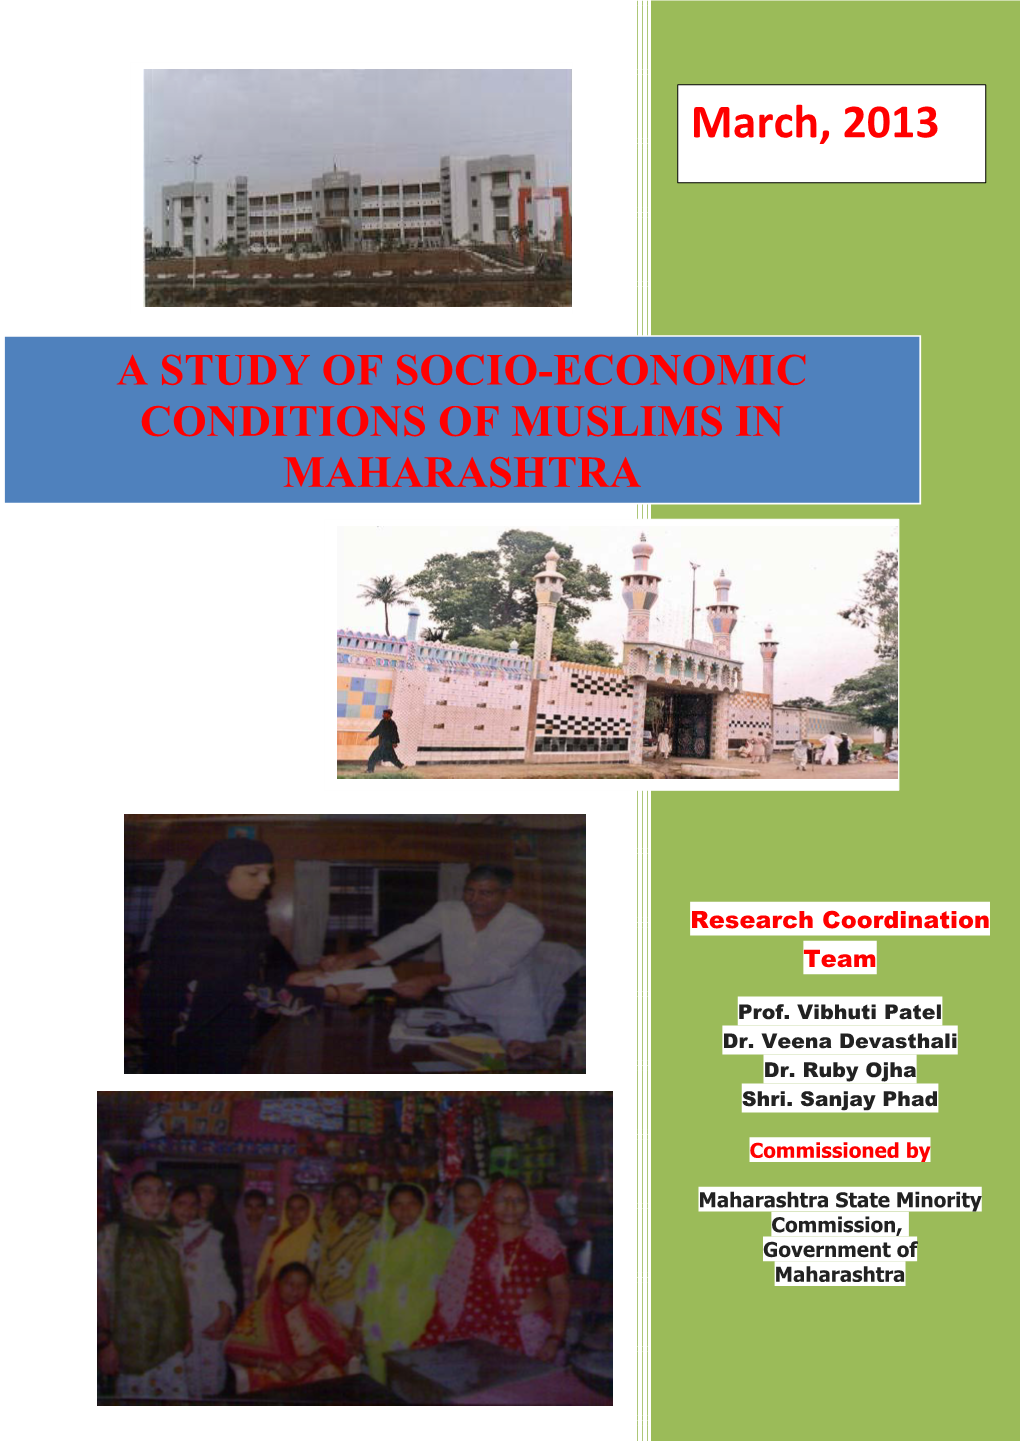 A Study of Socio-Economic Conditions of Muslims in Washim